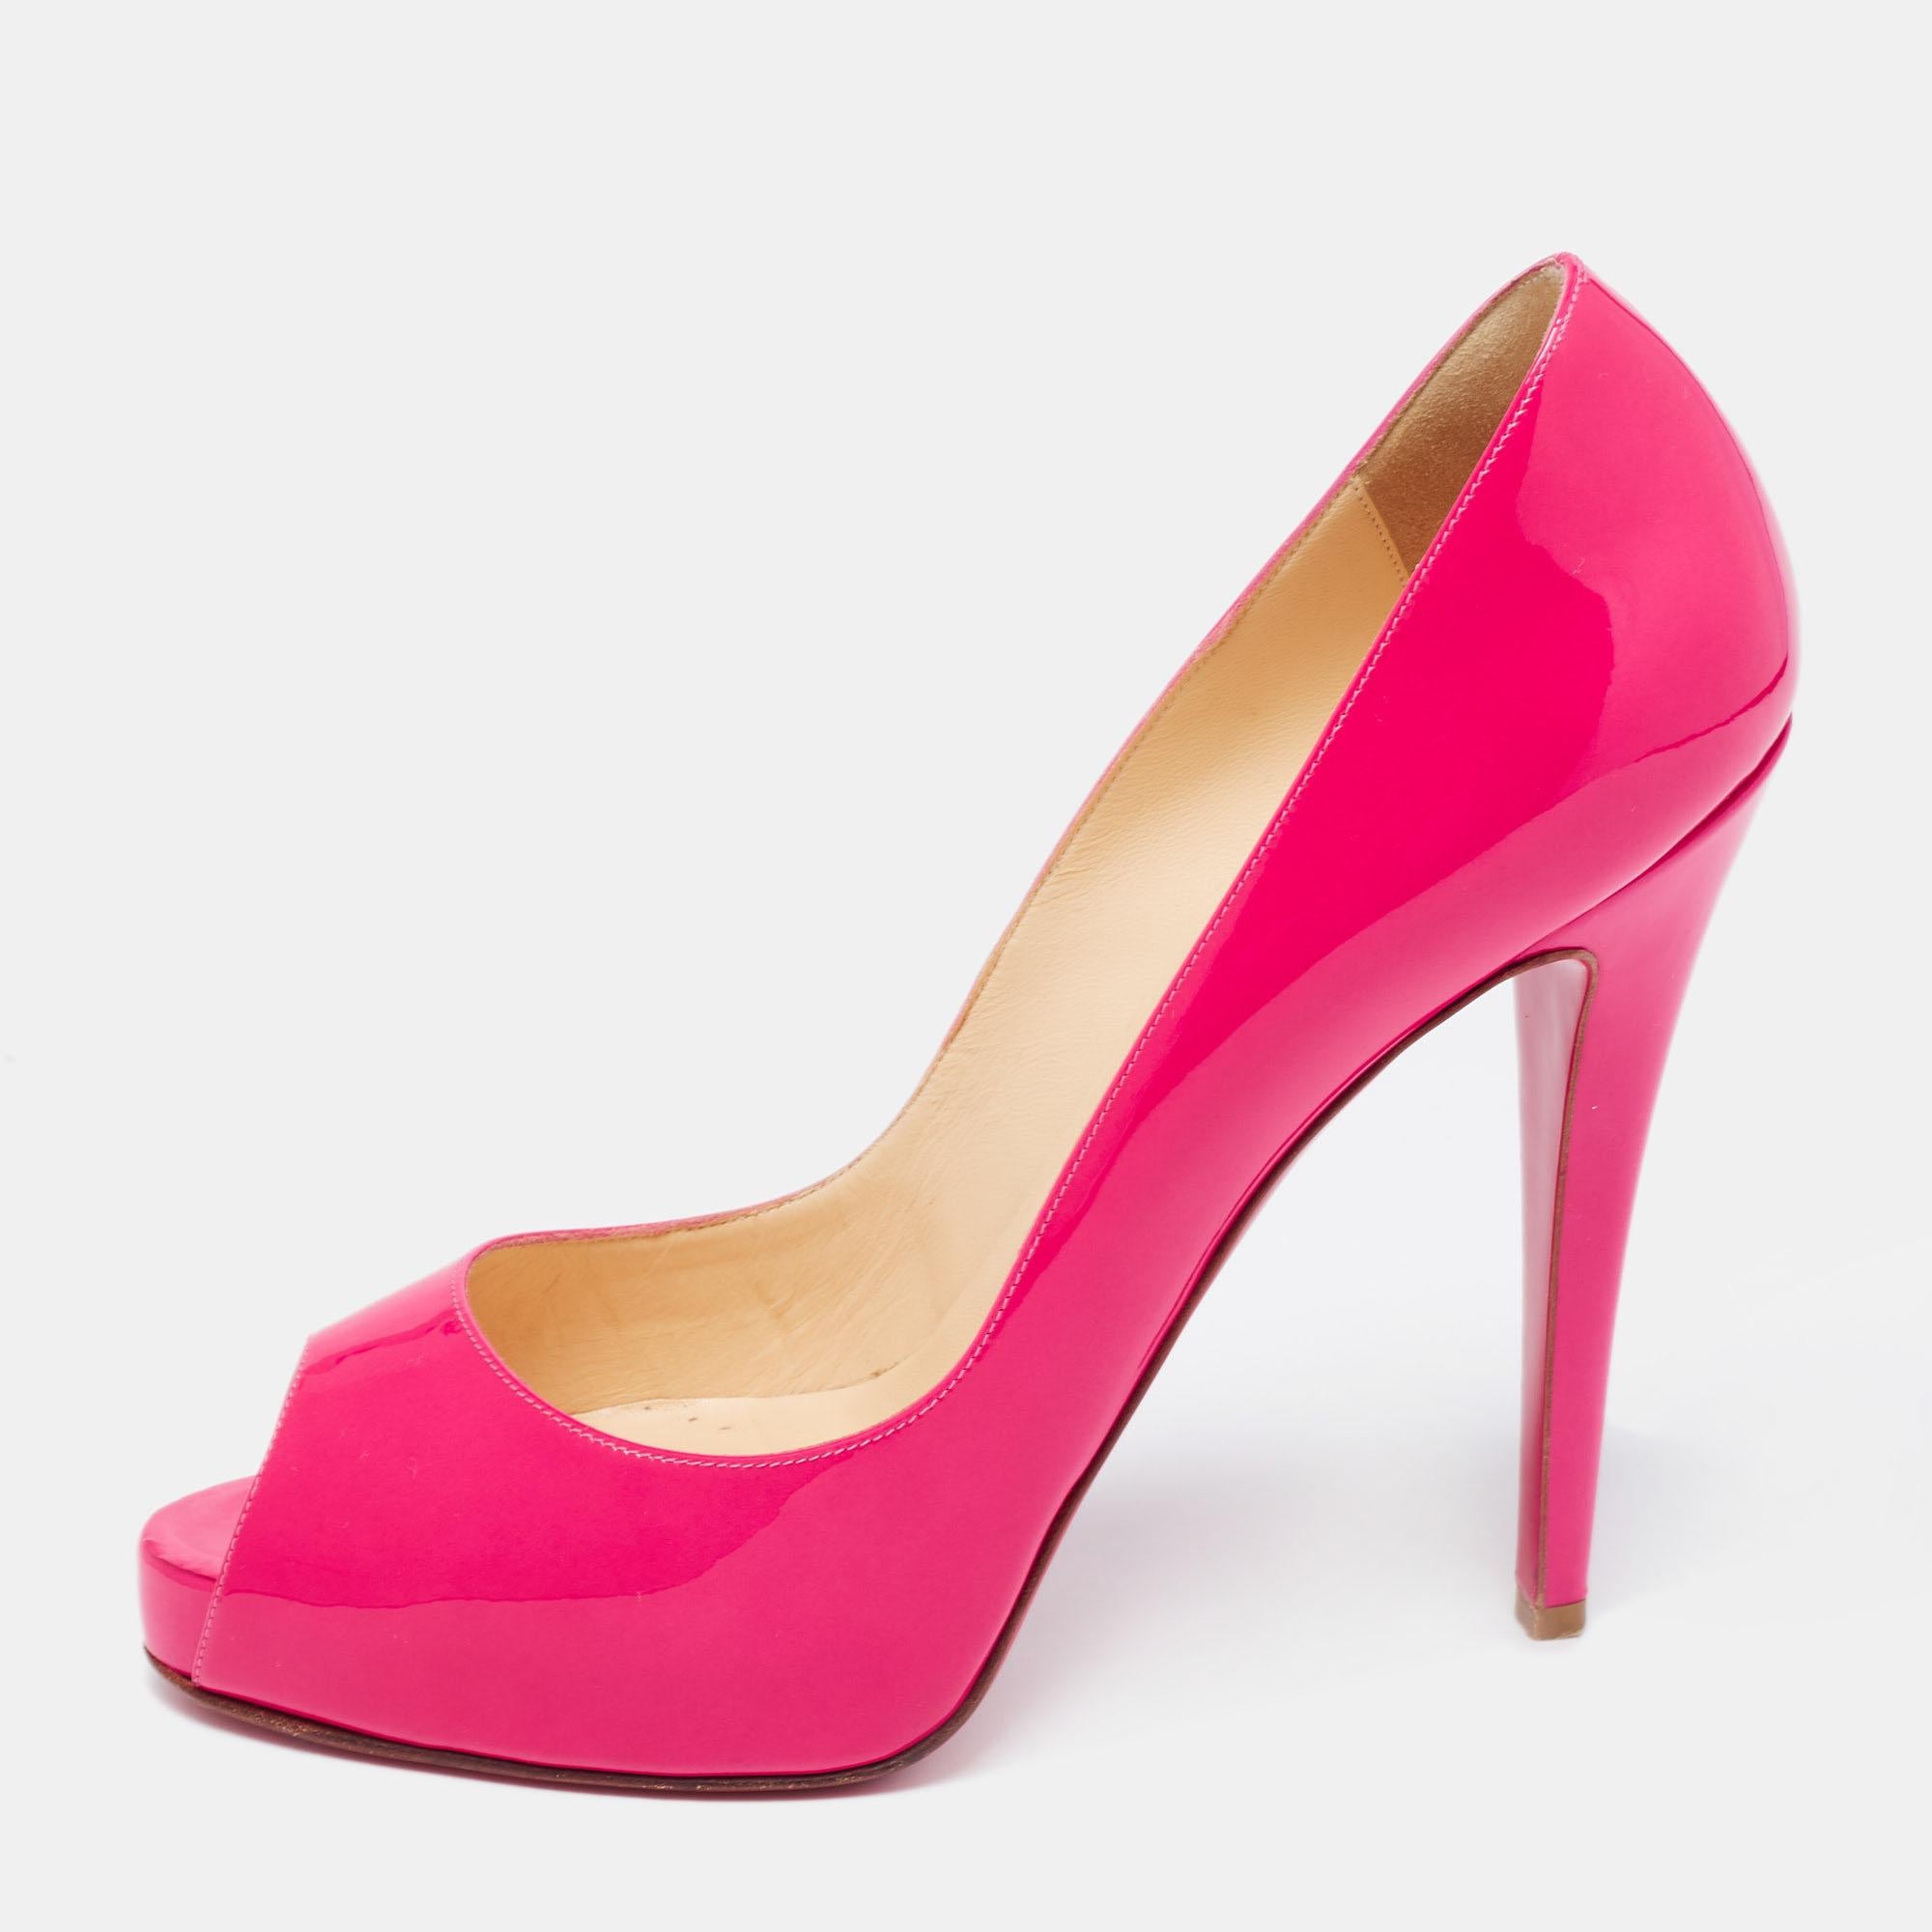 Christian Louboutin Pink Patent Leather New Very Prive Pumps Size 41 For Sale 2